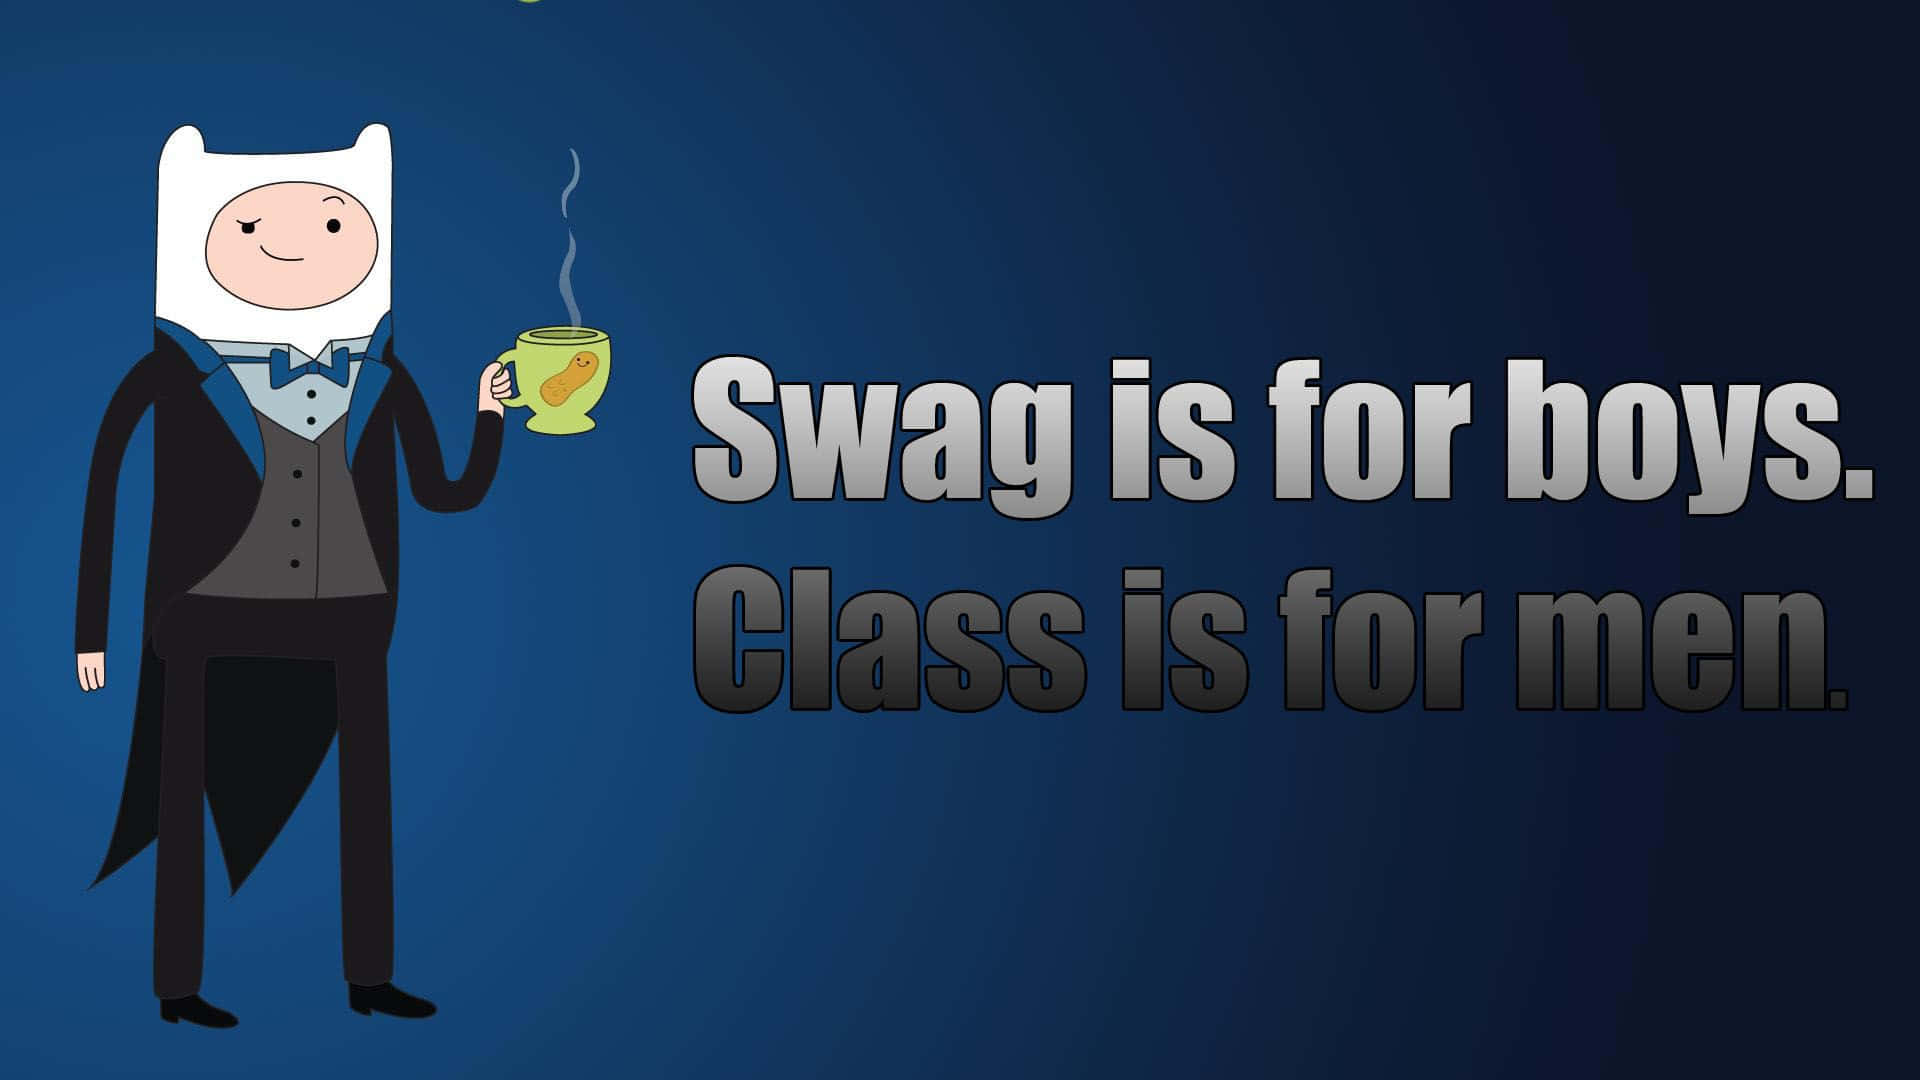 Rock your coolest swag today! Wallpaper